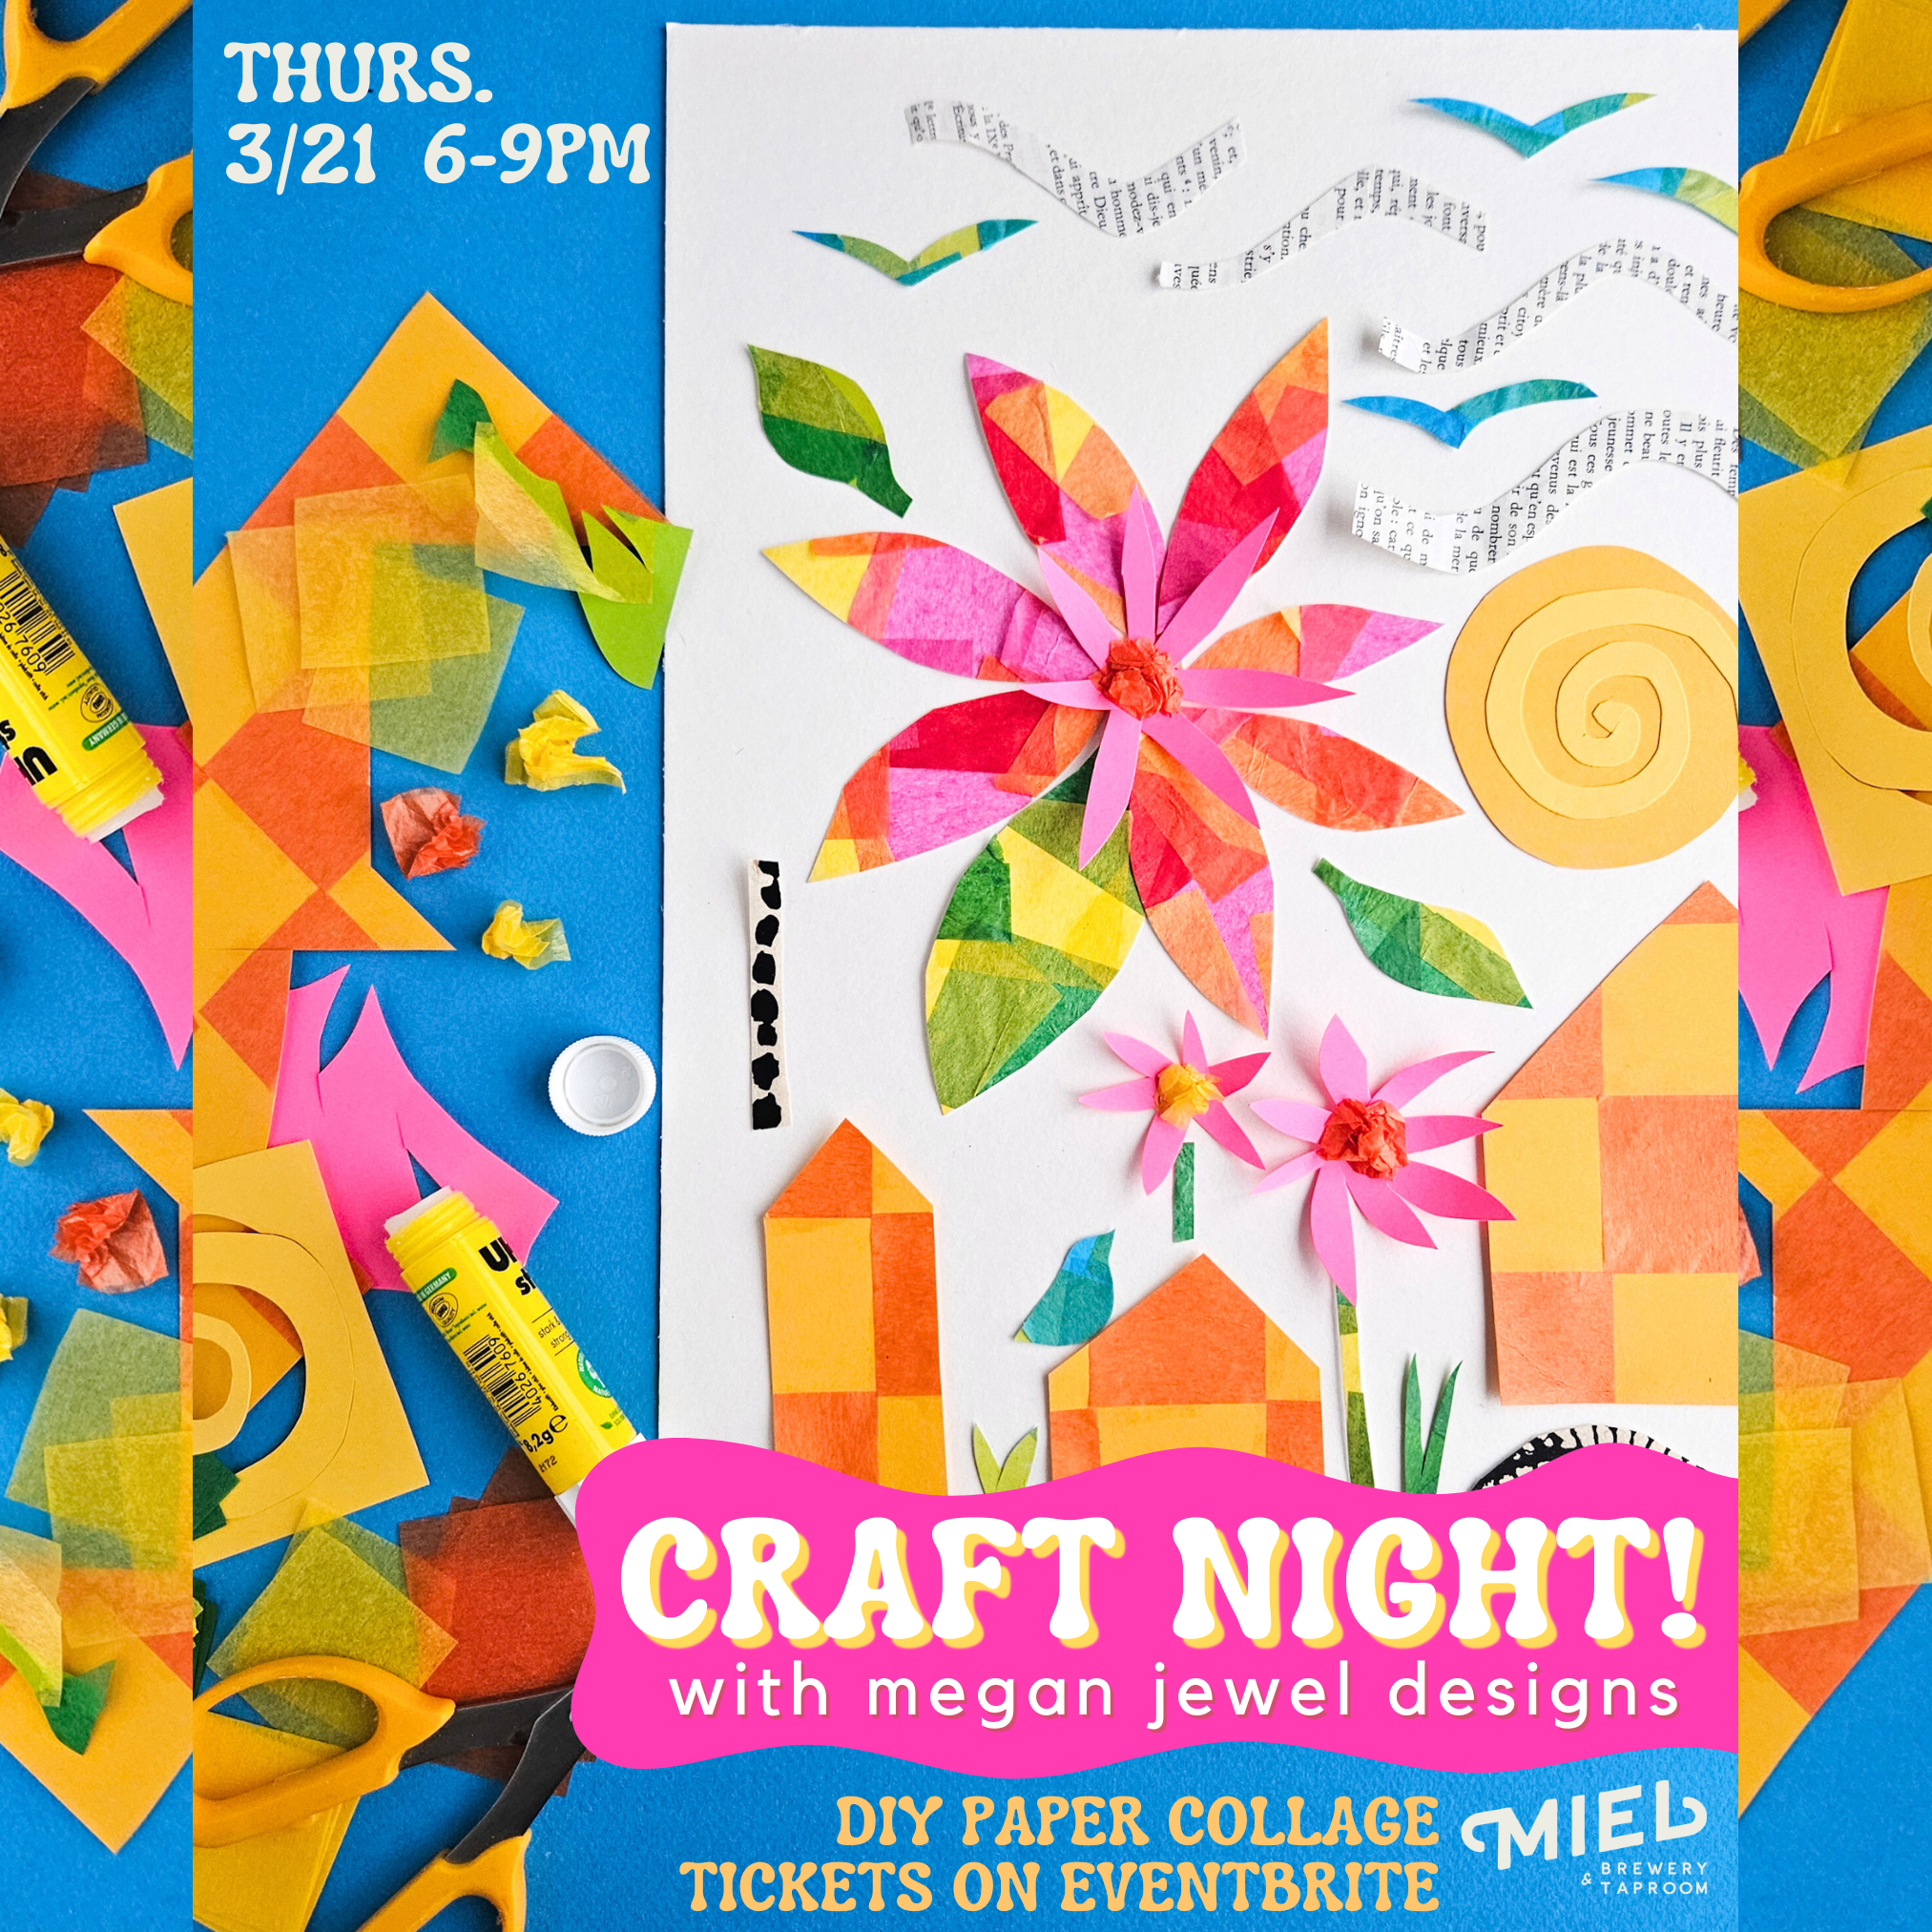 Square flyer for Craft Night: Paper Collages with Megan Jewel Designs!